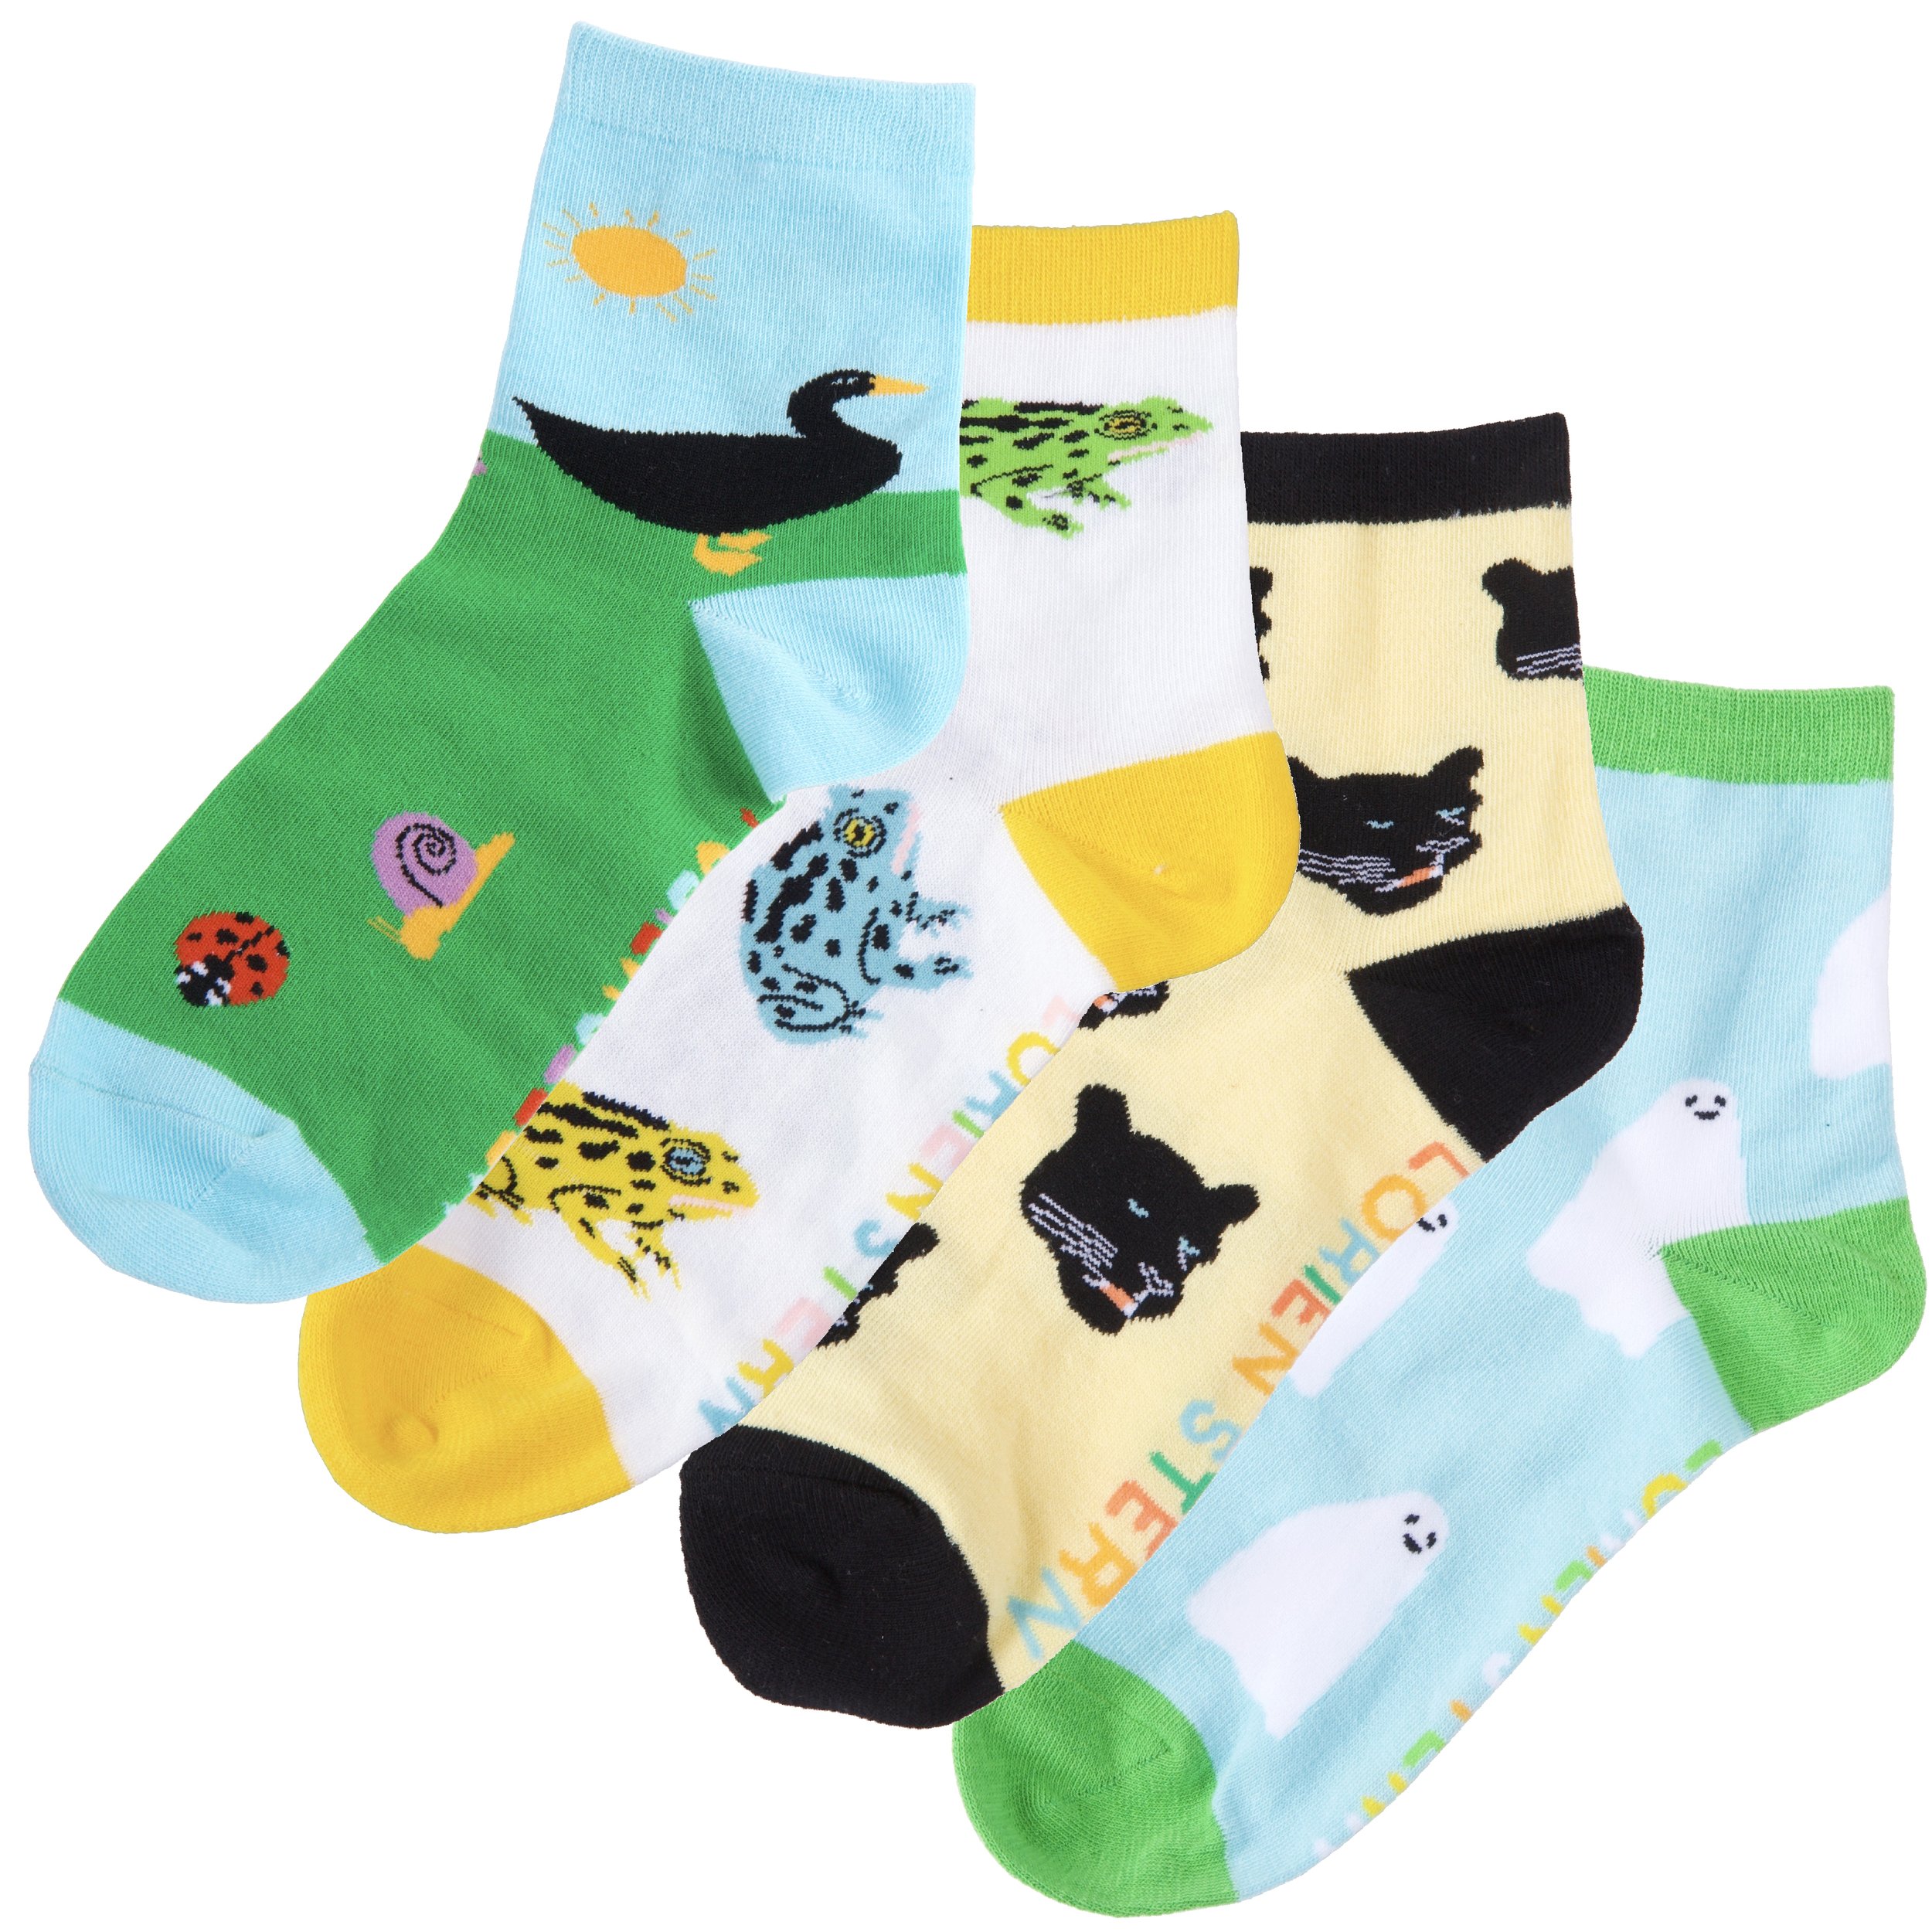 NEXT SOCKS WITH LYCRA  *** DINOSAUR THEME ***   7 PAIRS IN A PACK 